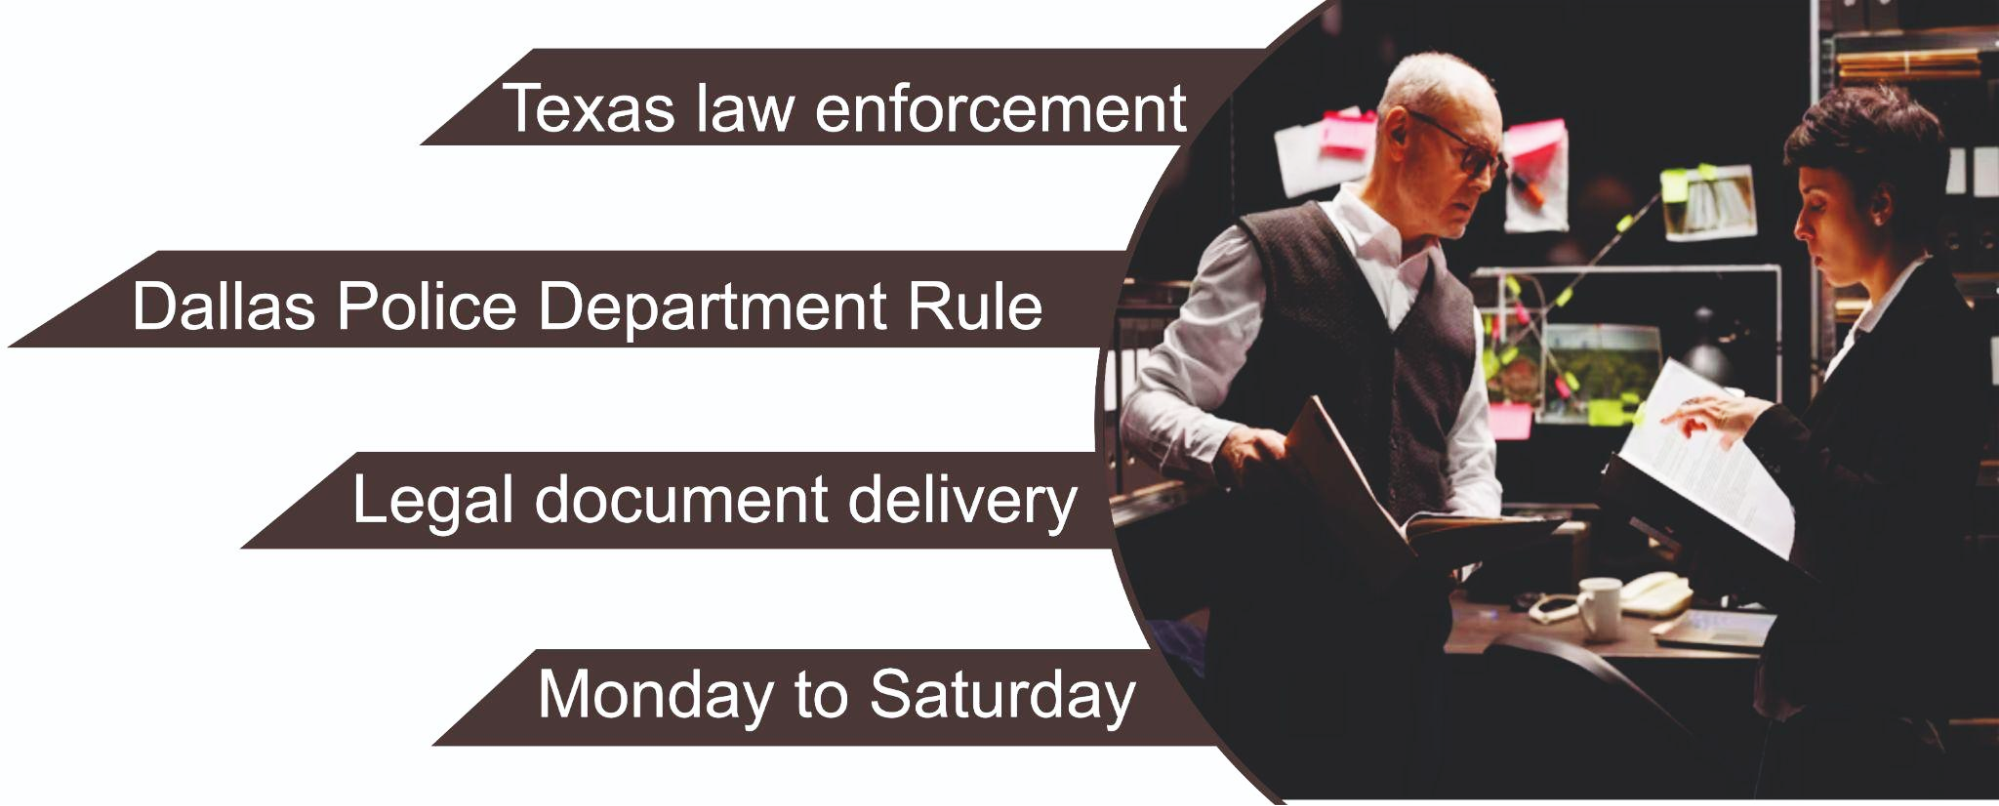 Texas law enforcement - dallas police department rule document delivery to saturday.